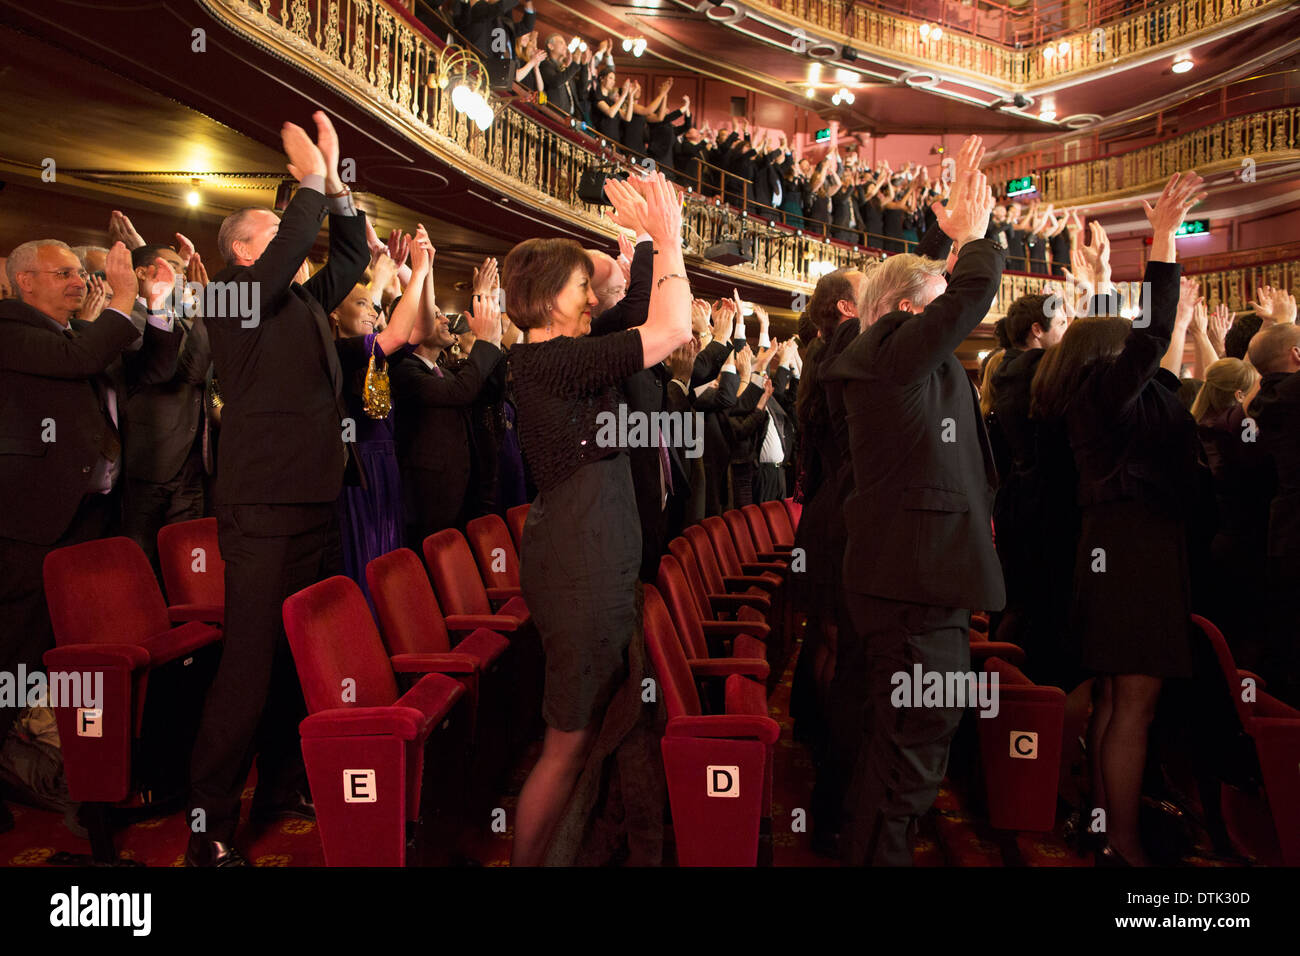 Audience applauding in theatre Banque D'Images